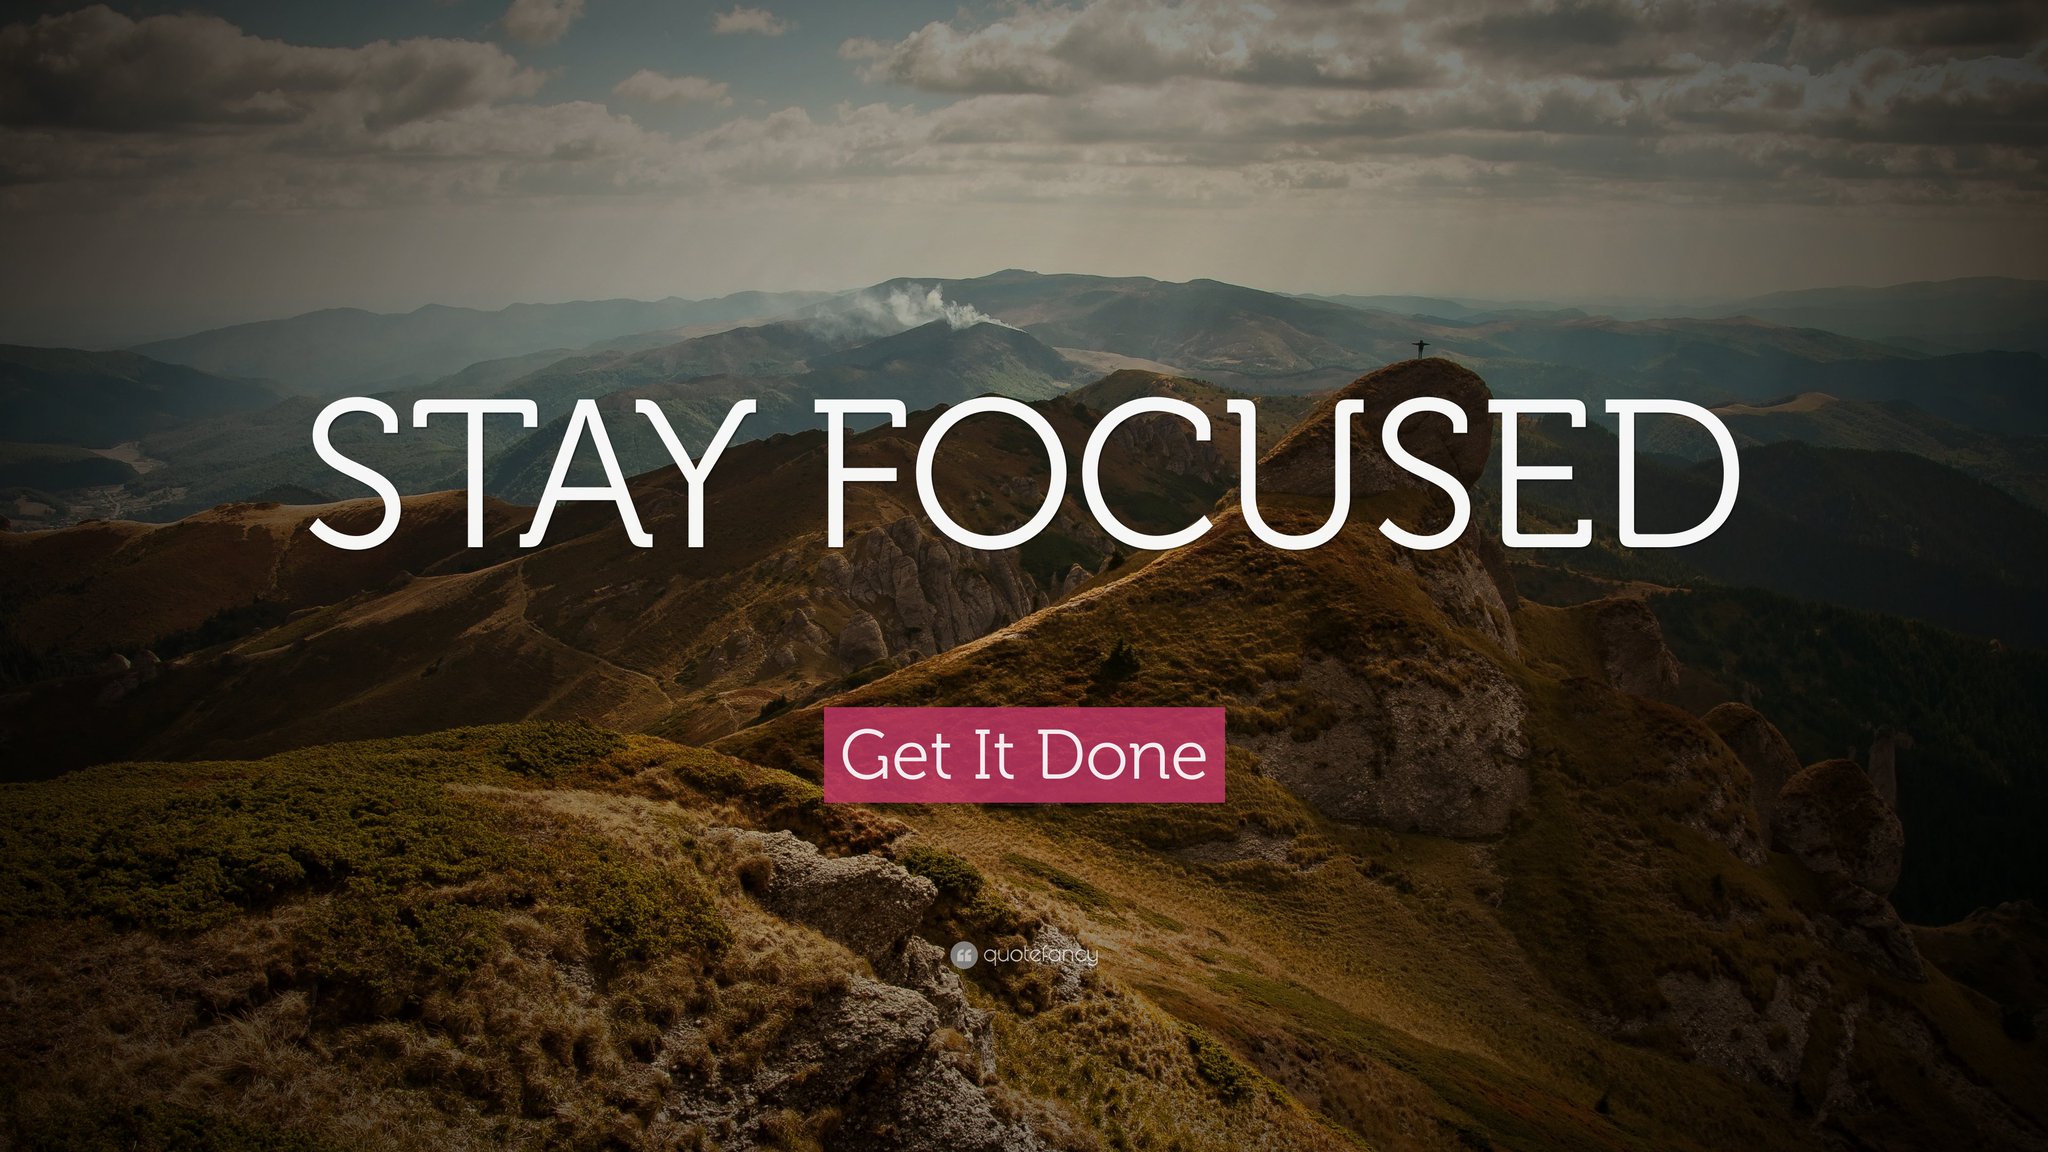 Kim Bryant, CPA on Twitter: "Stay focused...get it done. 